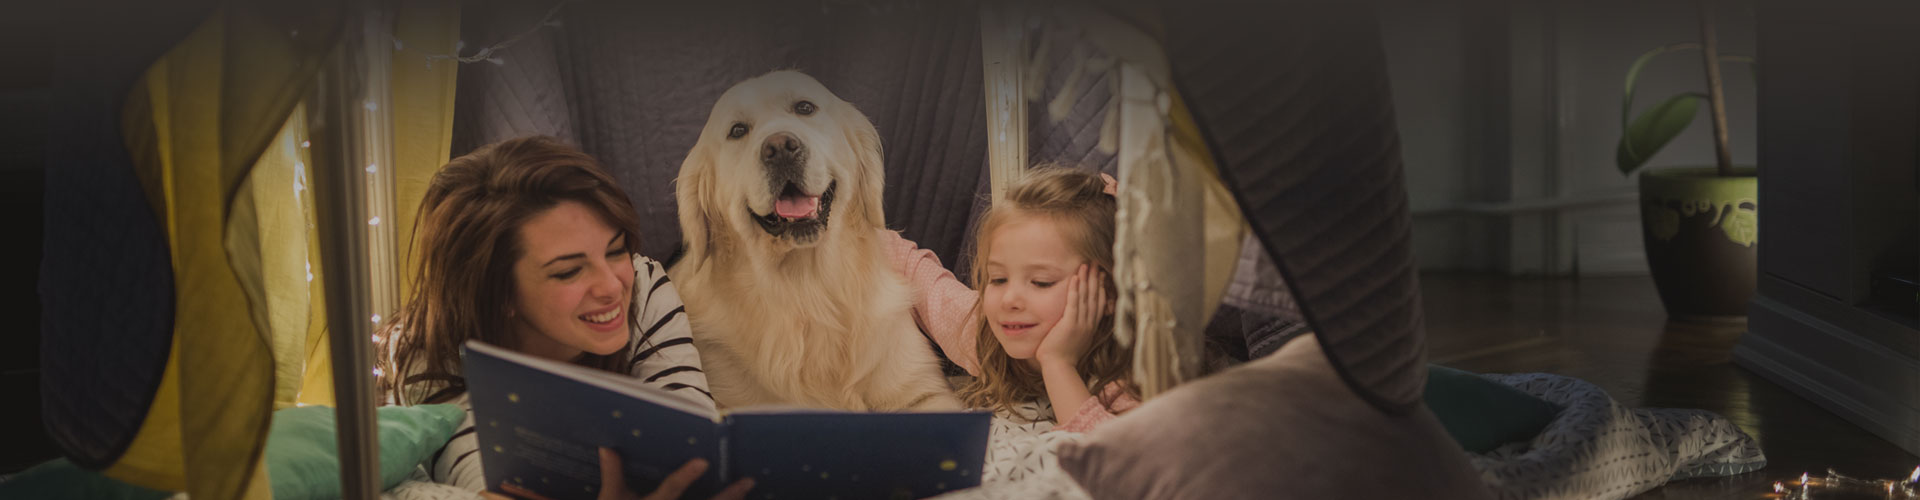 Header photo of young girl and her golden retriever dog